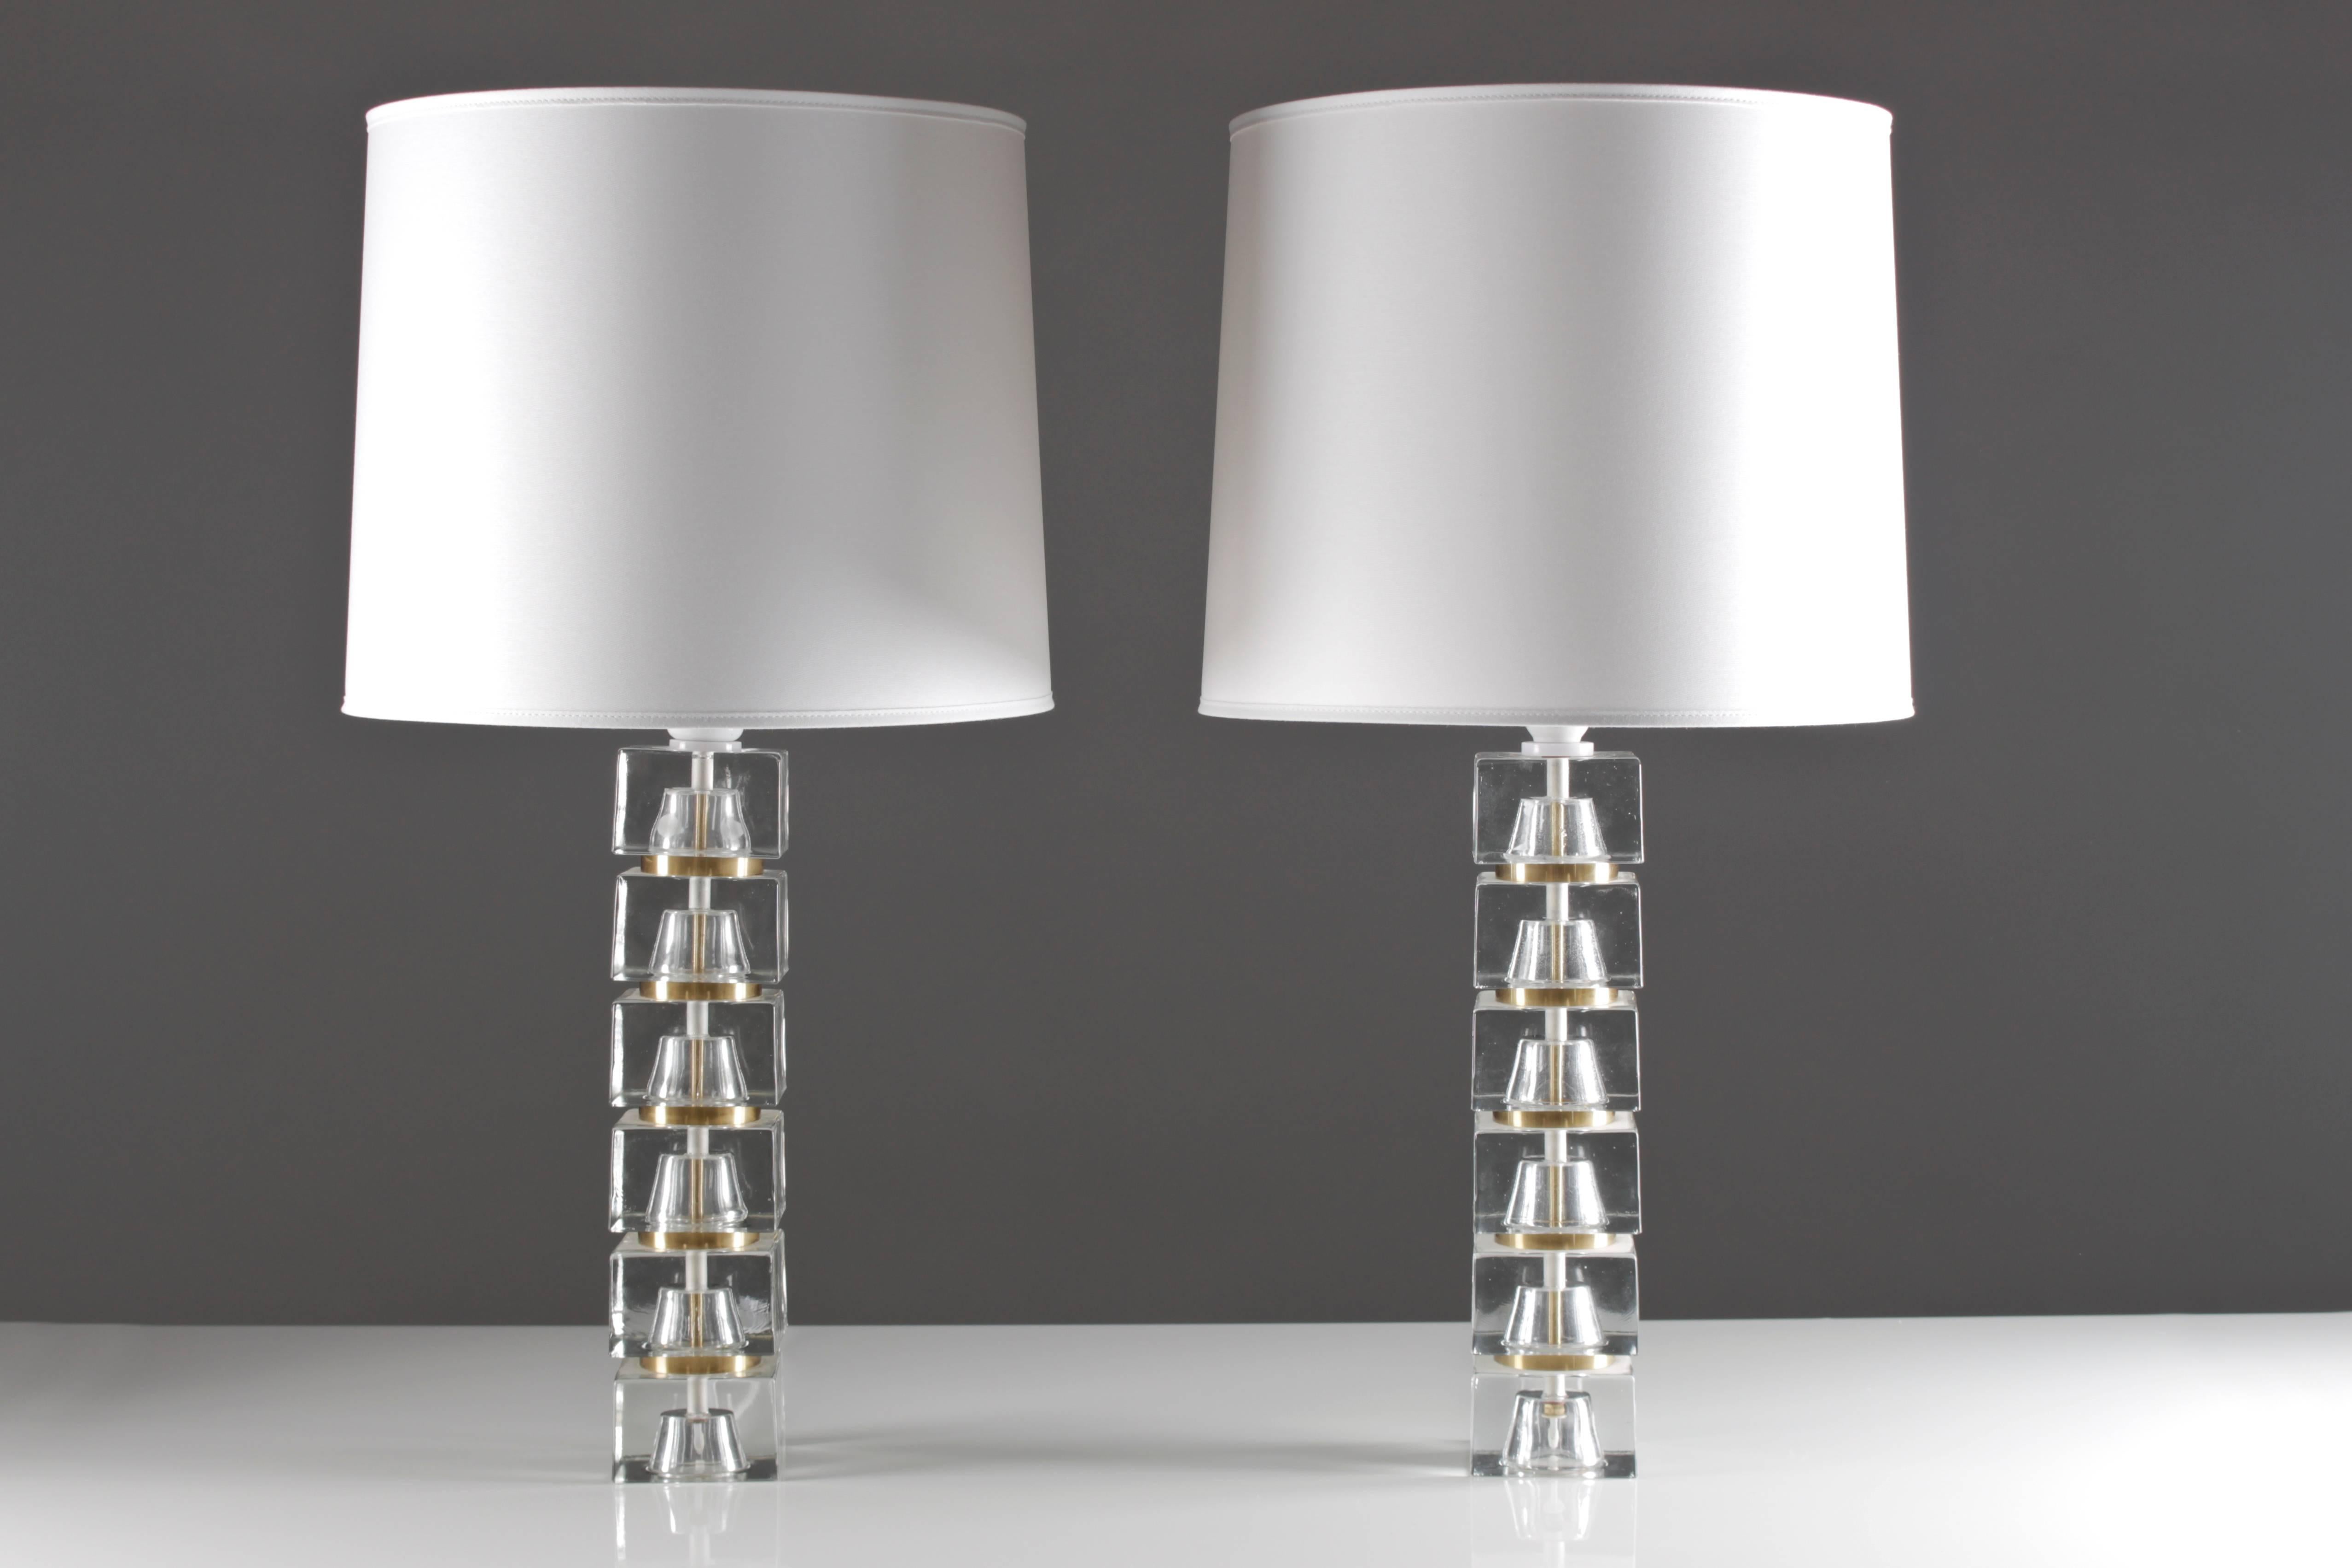 Stunning table lamps with cubes in clear glass, divided by rings in brass, possibly made by Carl fagerlund for Orrefors 
The lamps have been rewired.
Please note that the shades are not included in the price, but can be included for an extra cost